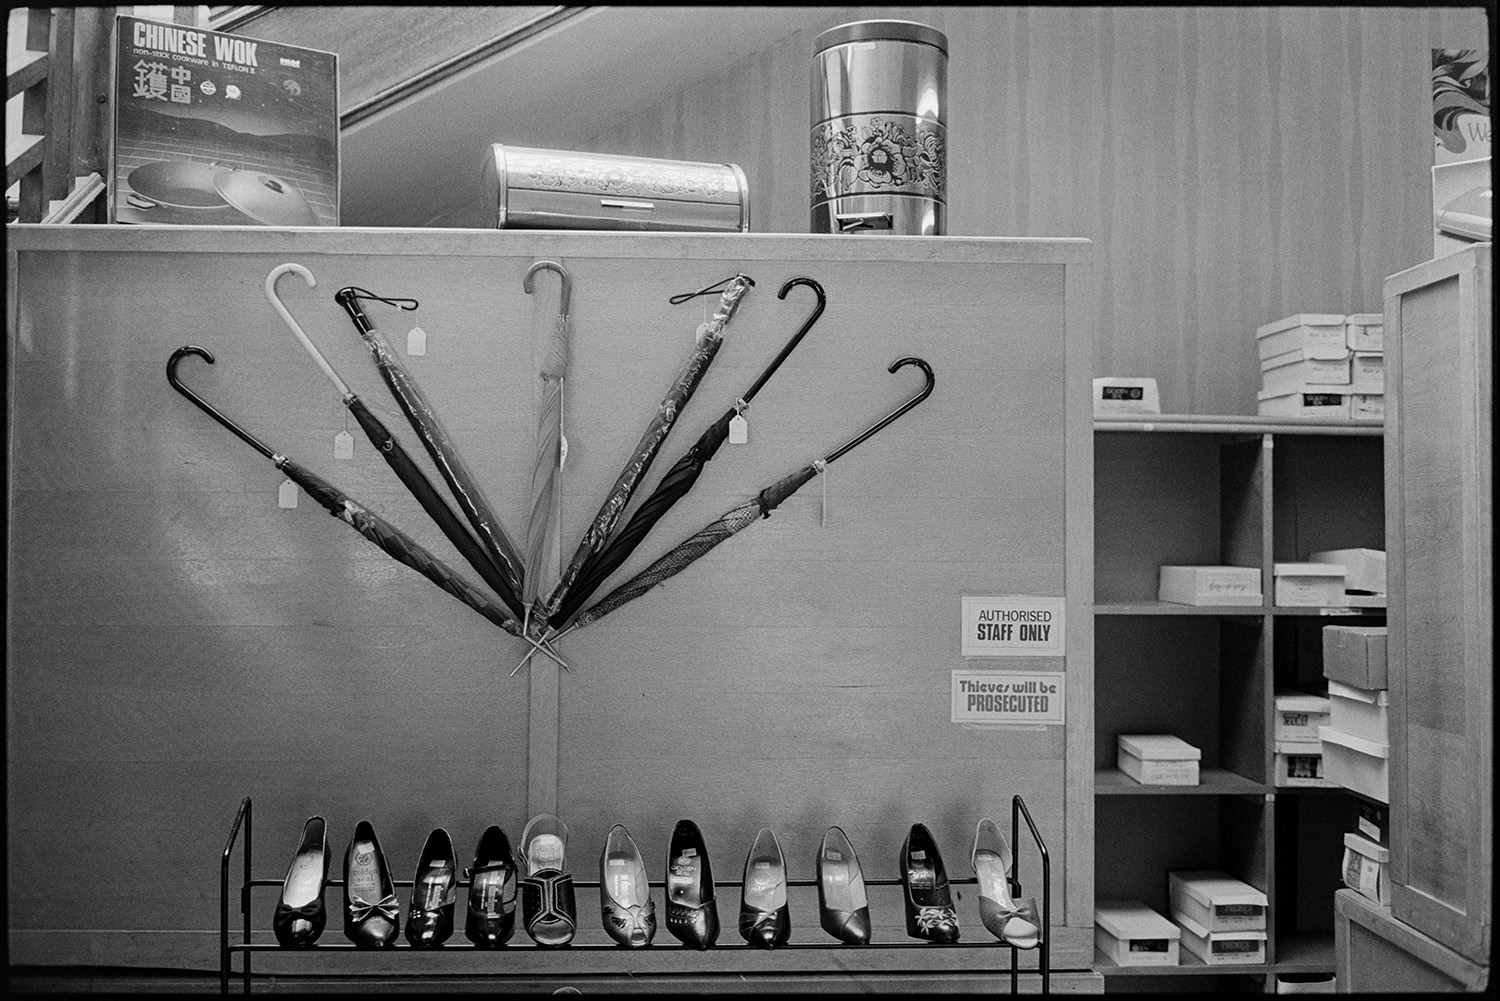 Interior of clothes shop shelves and displays of goods. Woman doing accounts, staircase. 
[A display of shoes and umbrellas in a clothes shop in Buttgarden Street, Bideford. A Chinese wok, bread bin and flip bin are displayed on top of the cabinet with the umbrellas. Shoe boxes can also be seen on shelves in the background.]